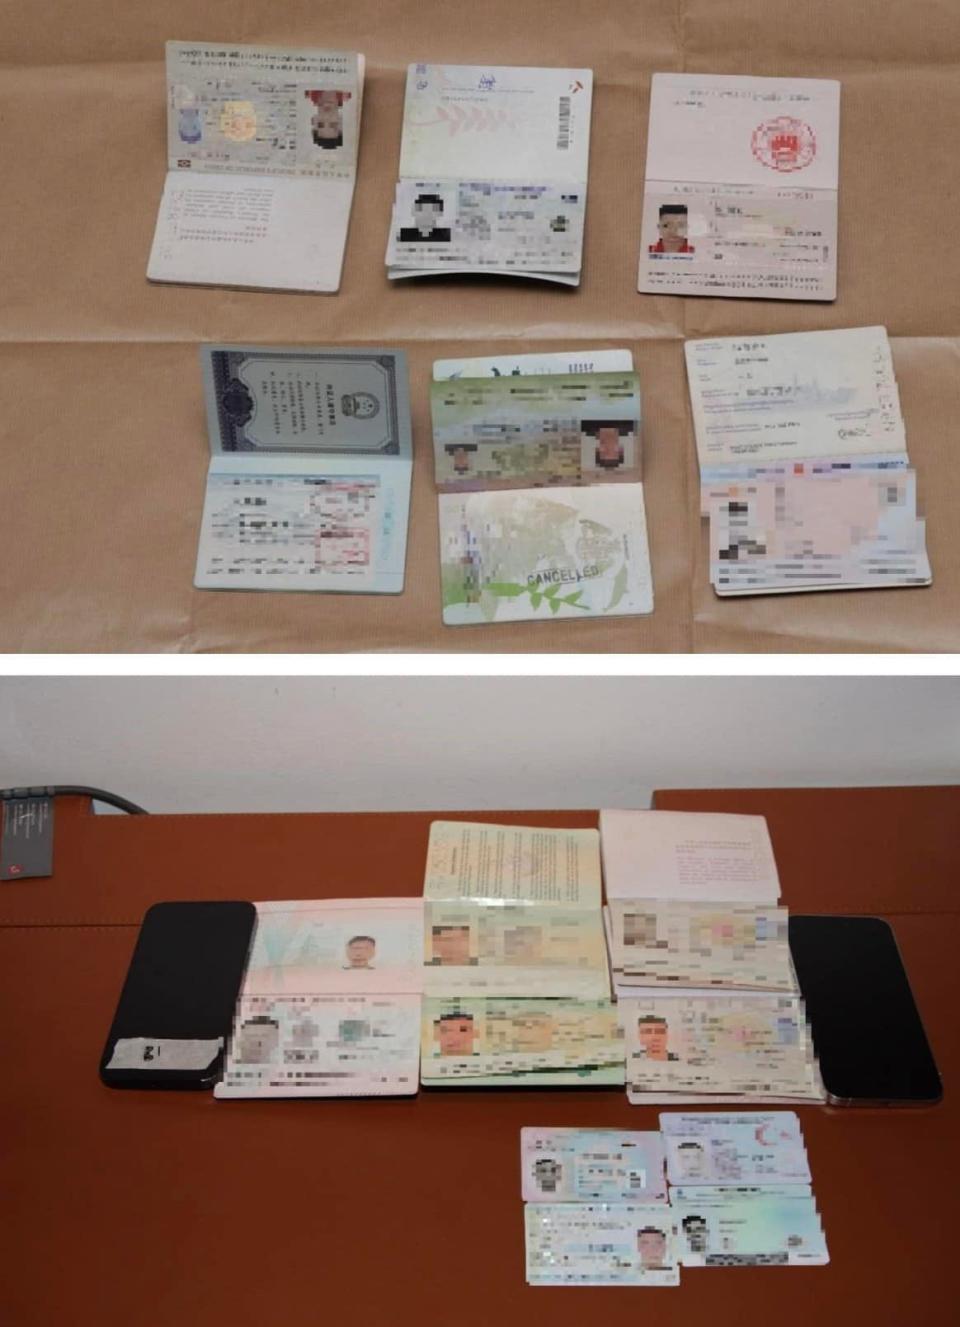 Passports seized by the Singapore police of suspected money launderers and forgers